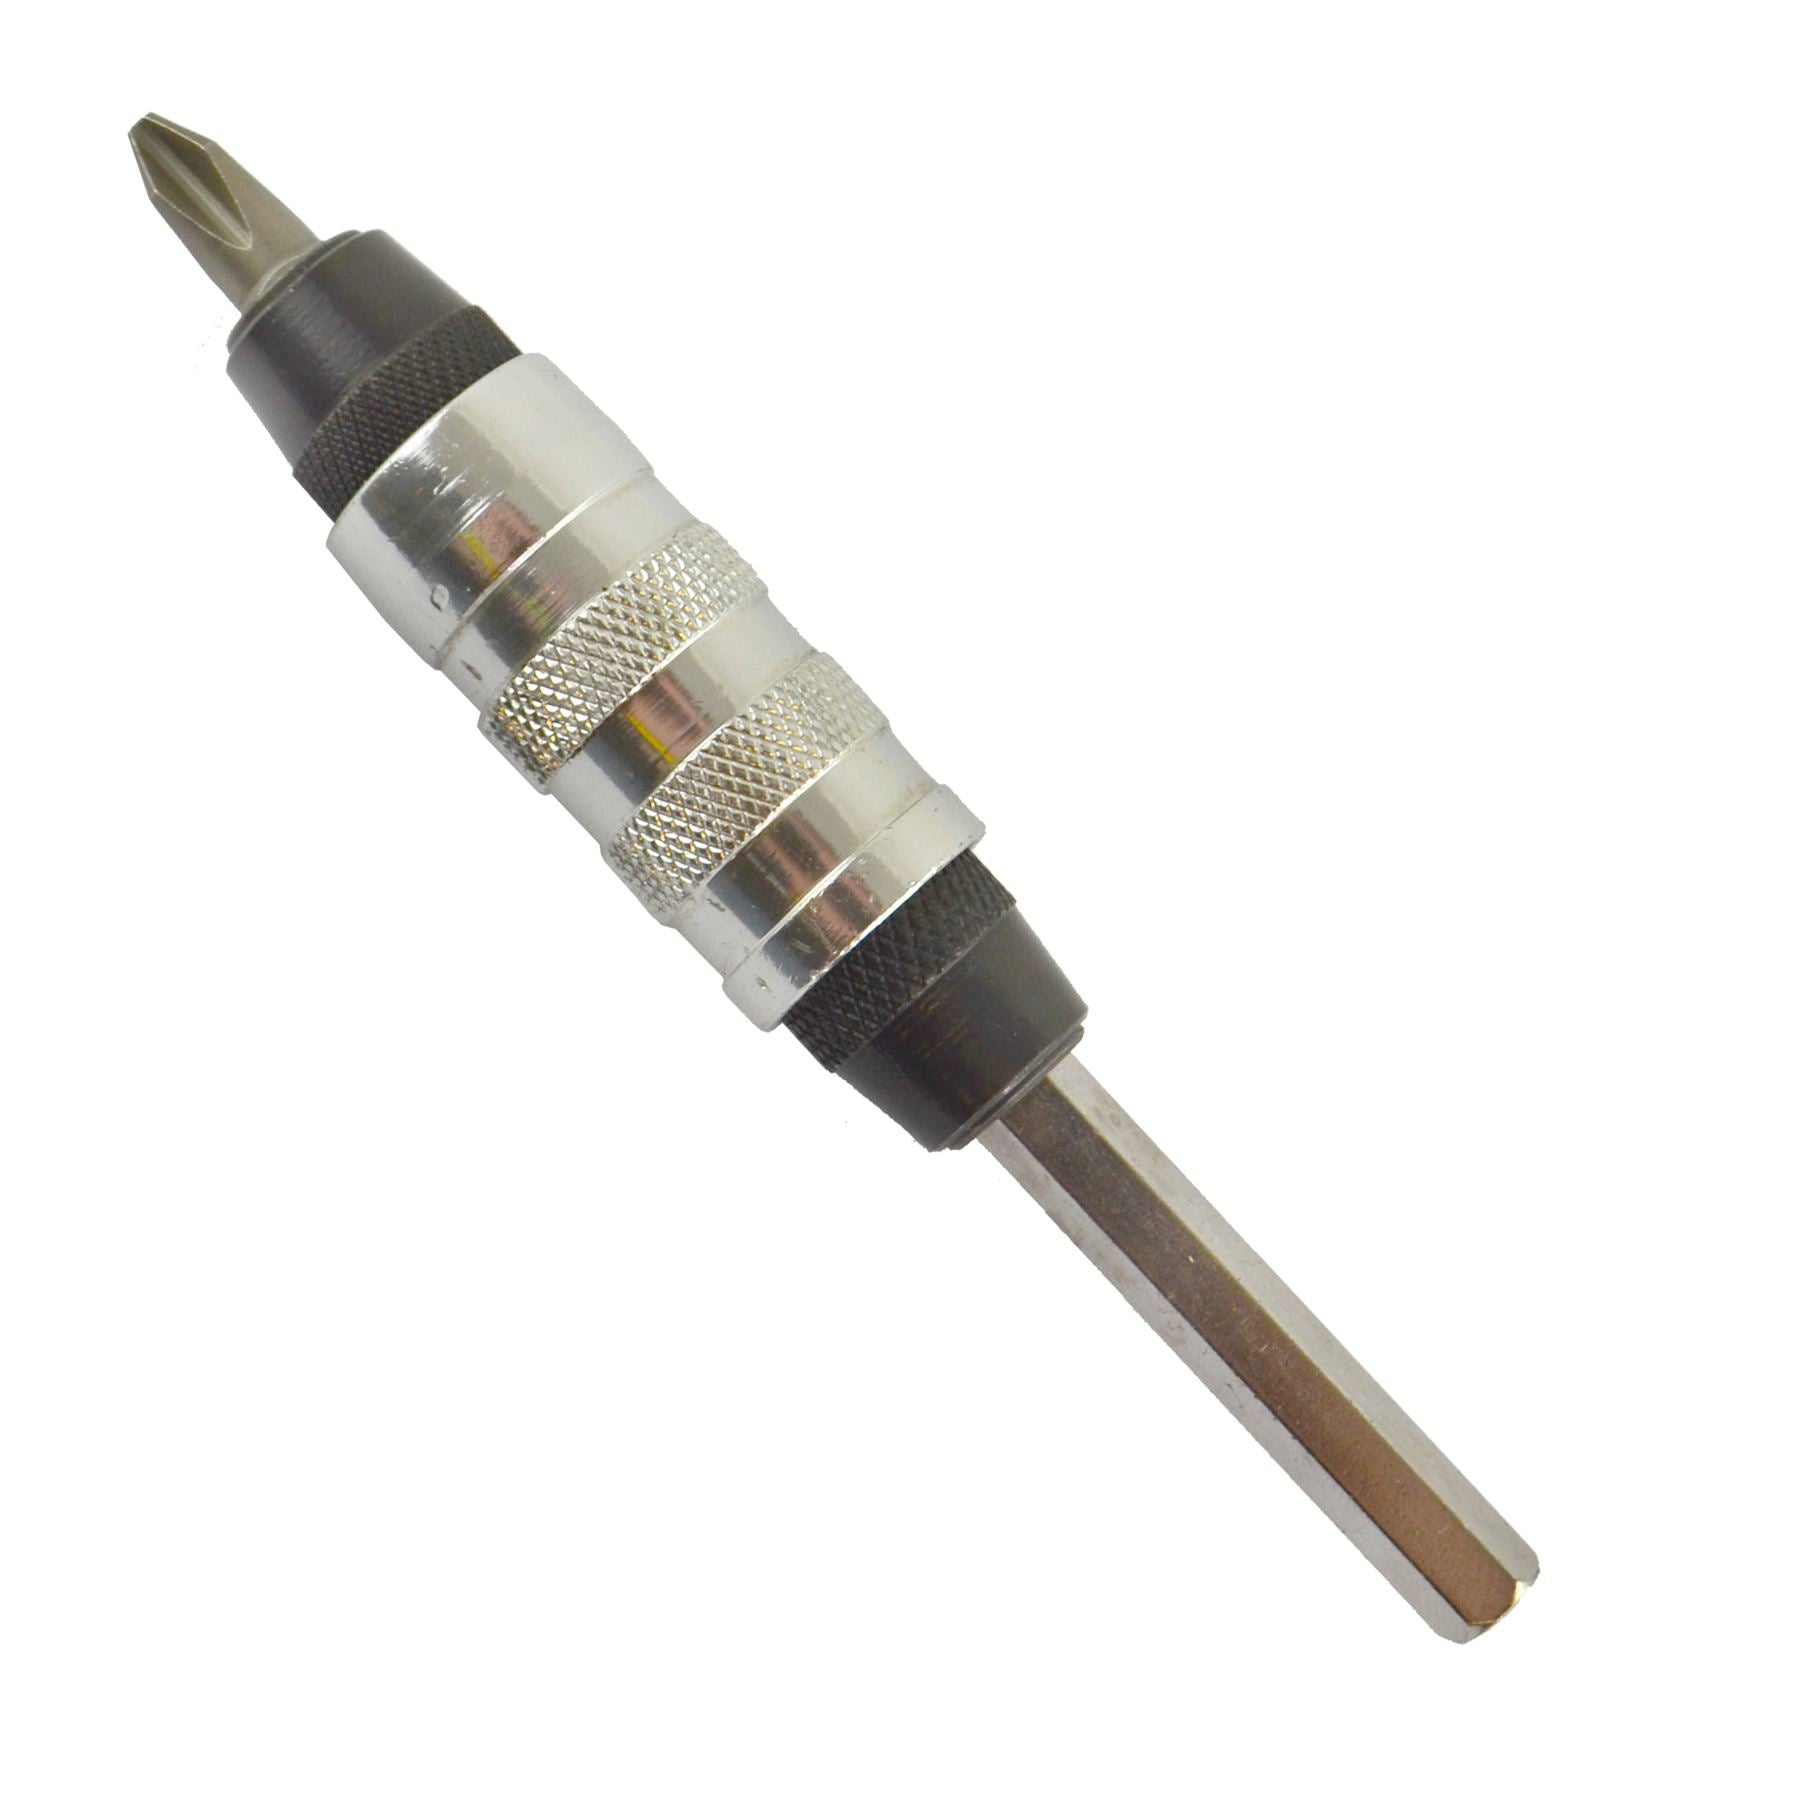 Offline Driver Straight 1/4" Hex Shaft Drilling Driving 15 Degree Off Centre SIL340